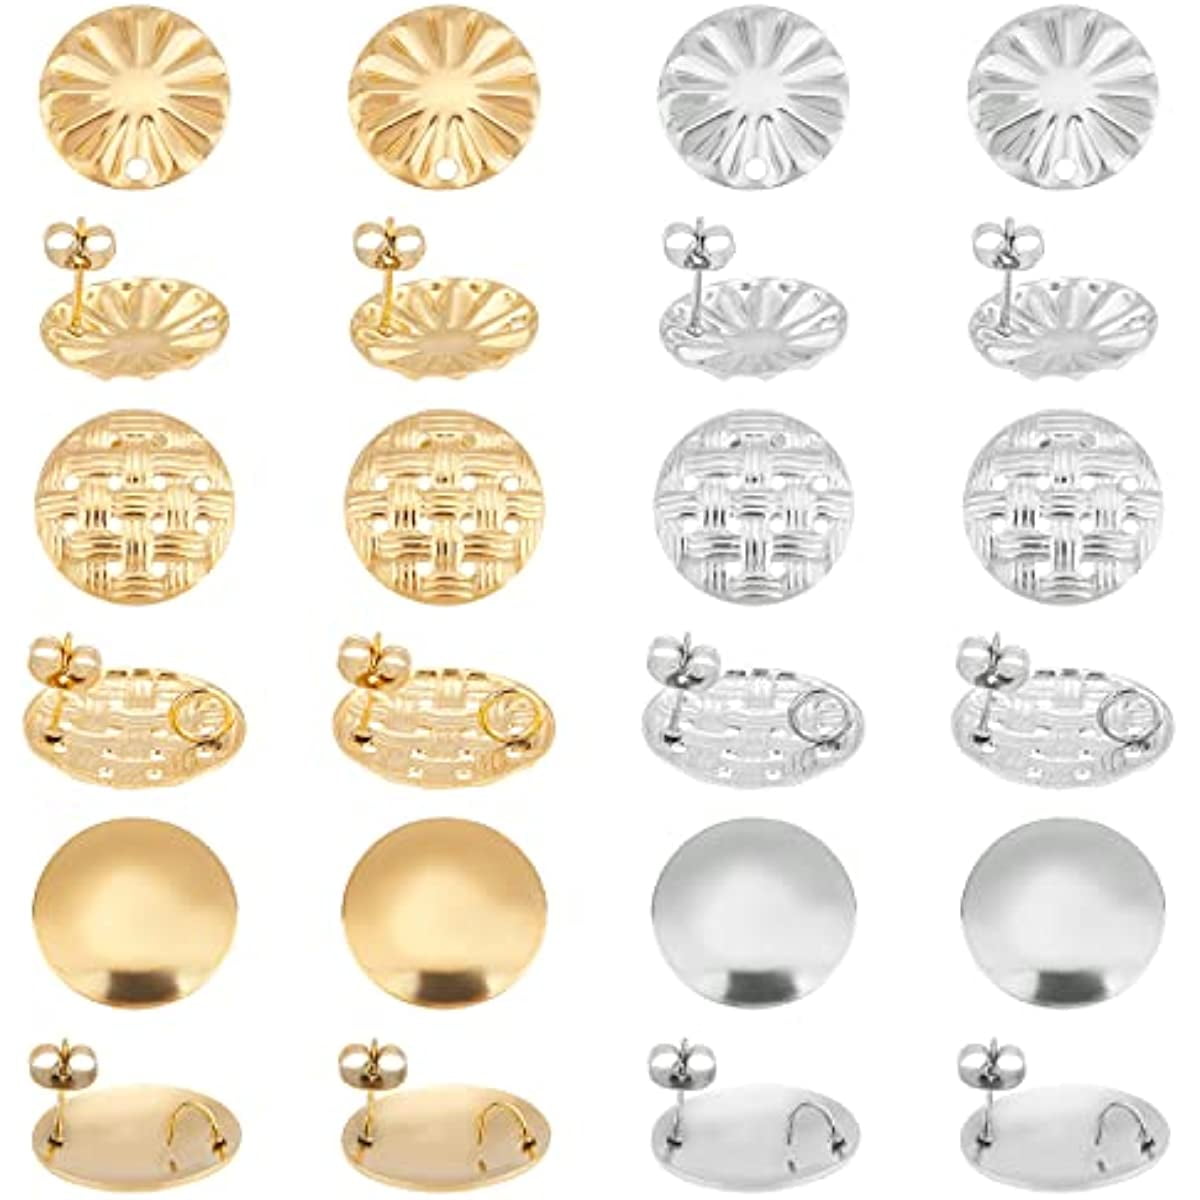 ZUARFY 12 Pieces Earring Backs Silicone Flat Earring Backs for Studs Post  Clear Silver 